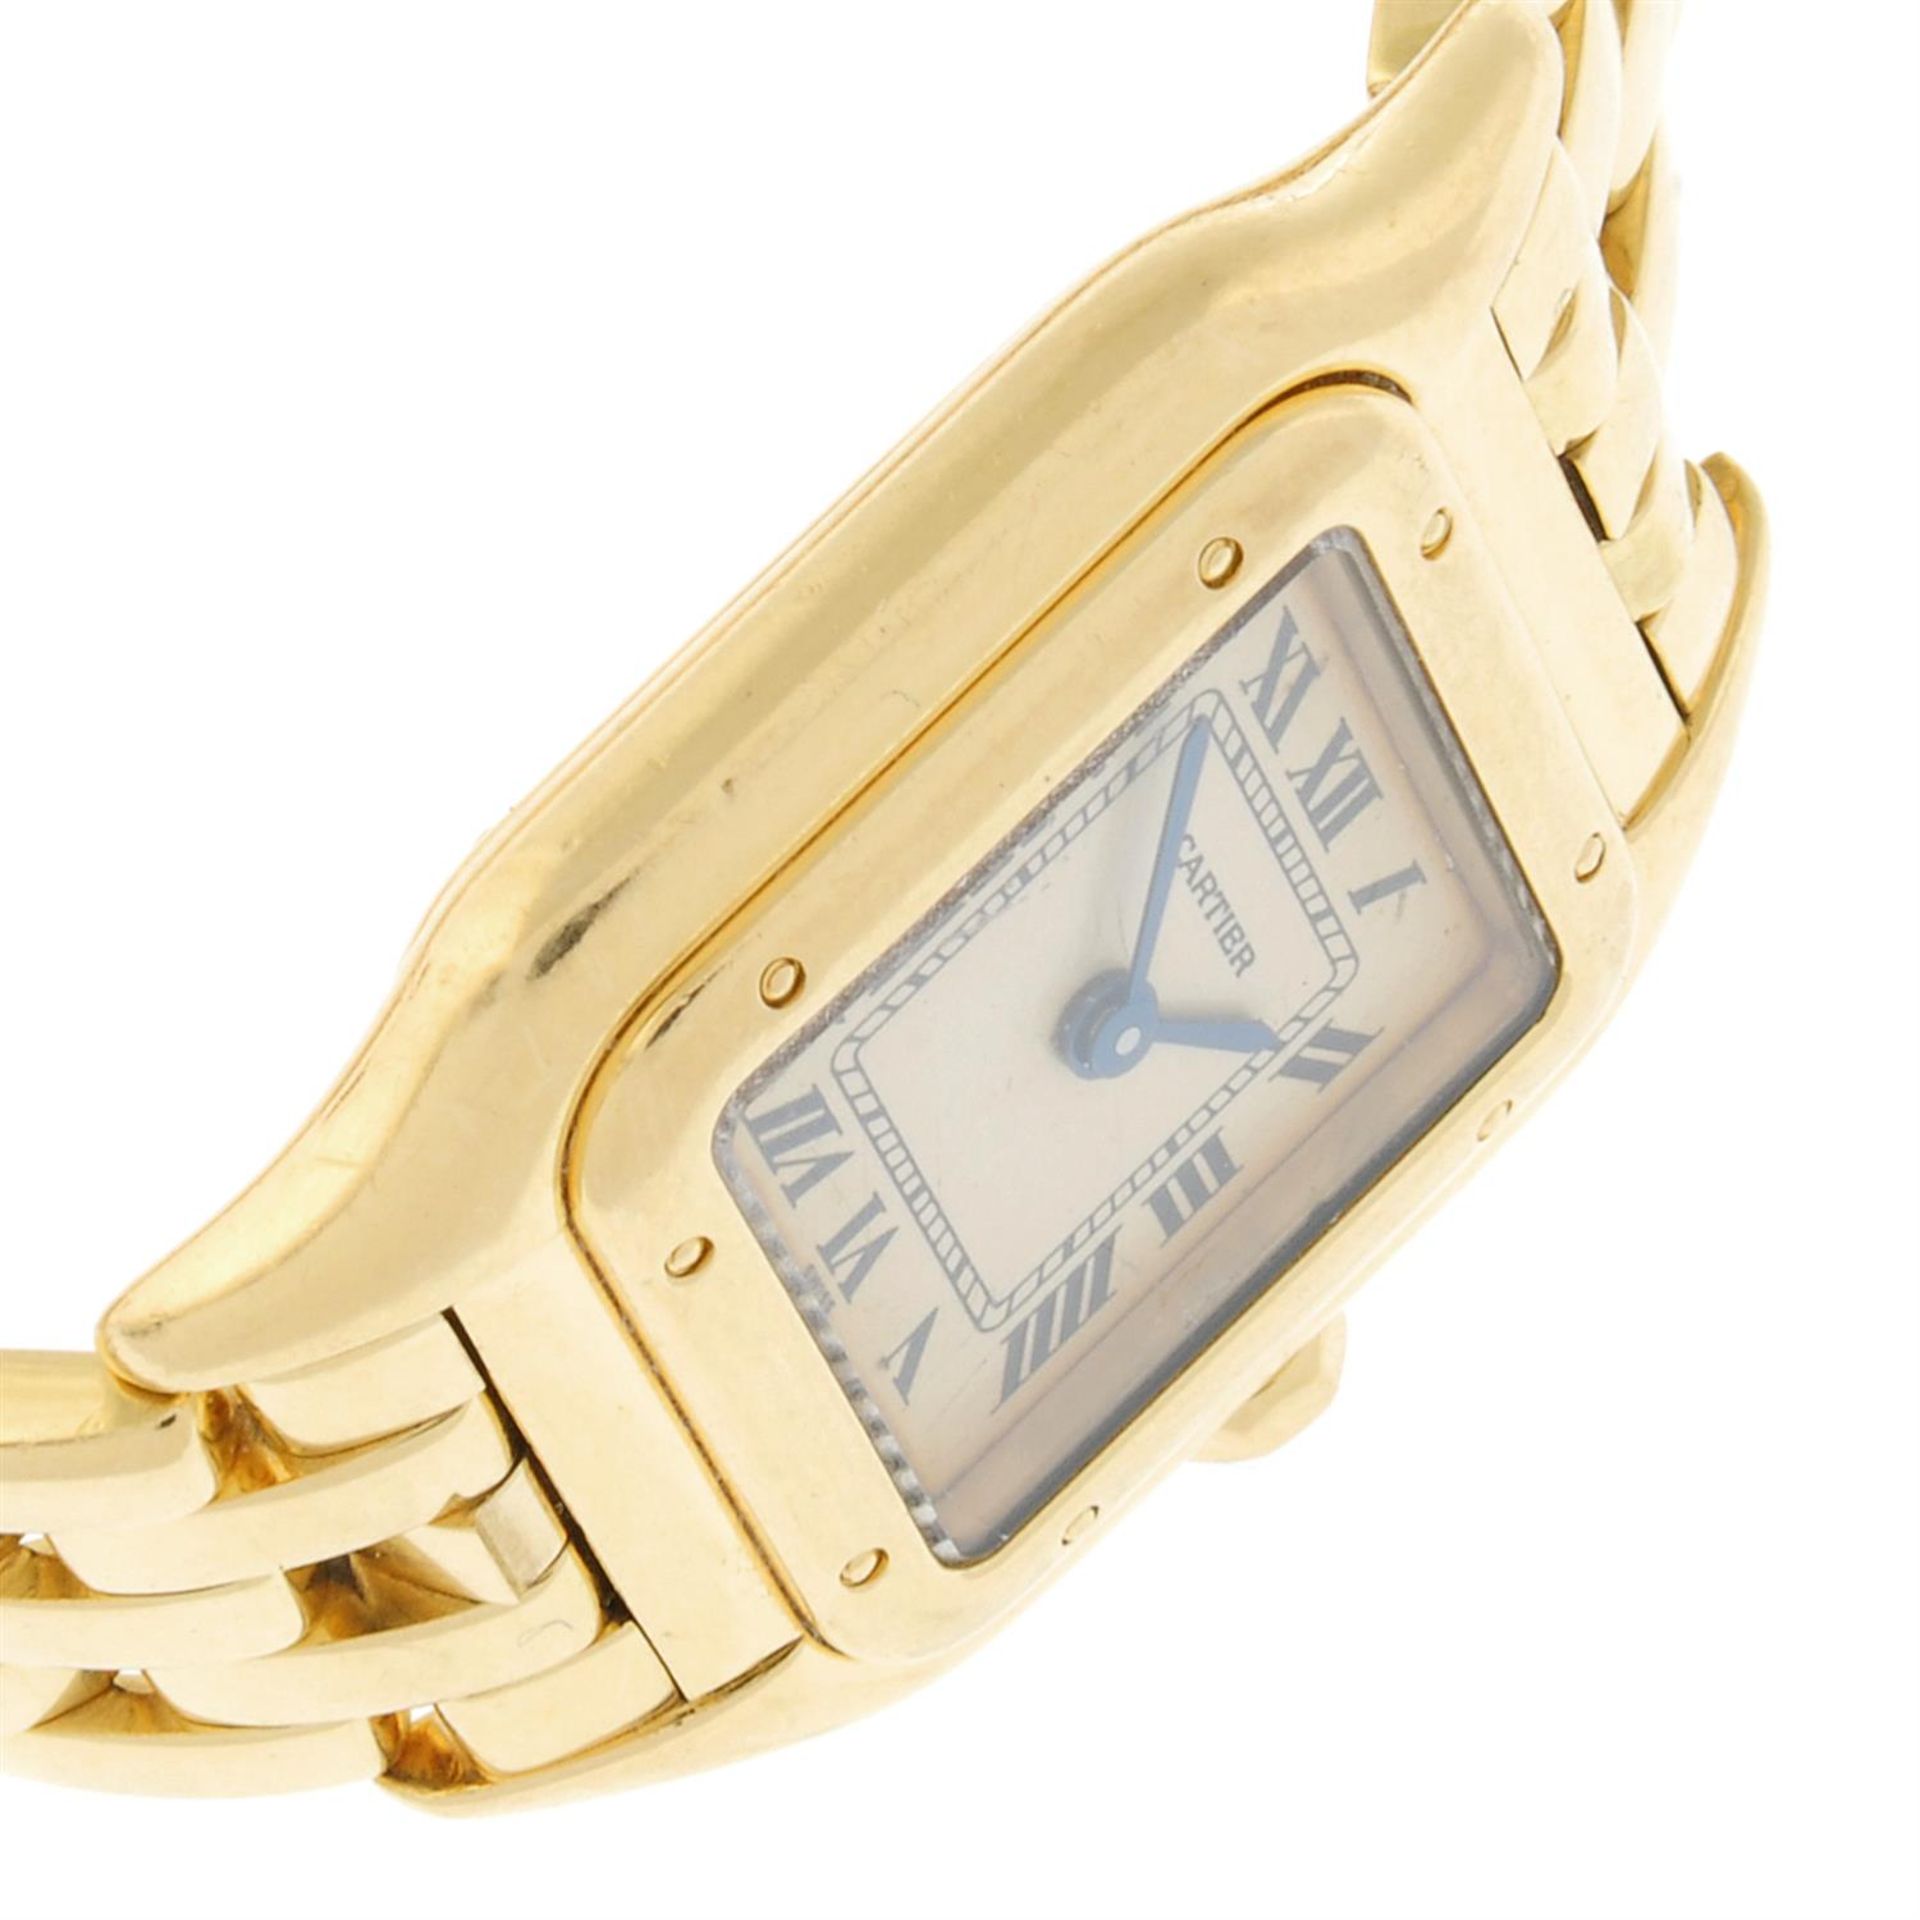 Cartier - a Panthère watch, 21mm. - Image 4 of 7